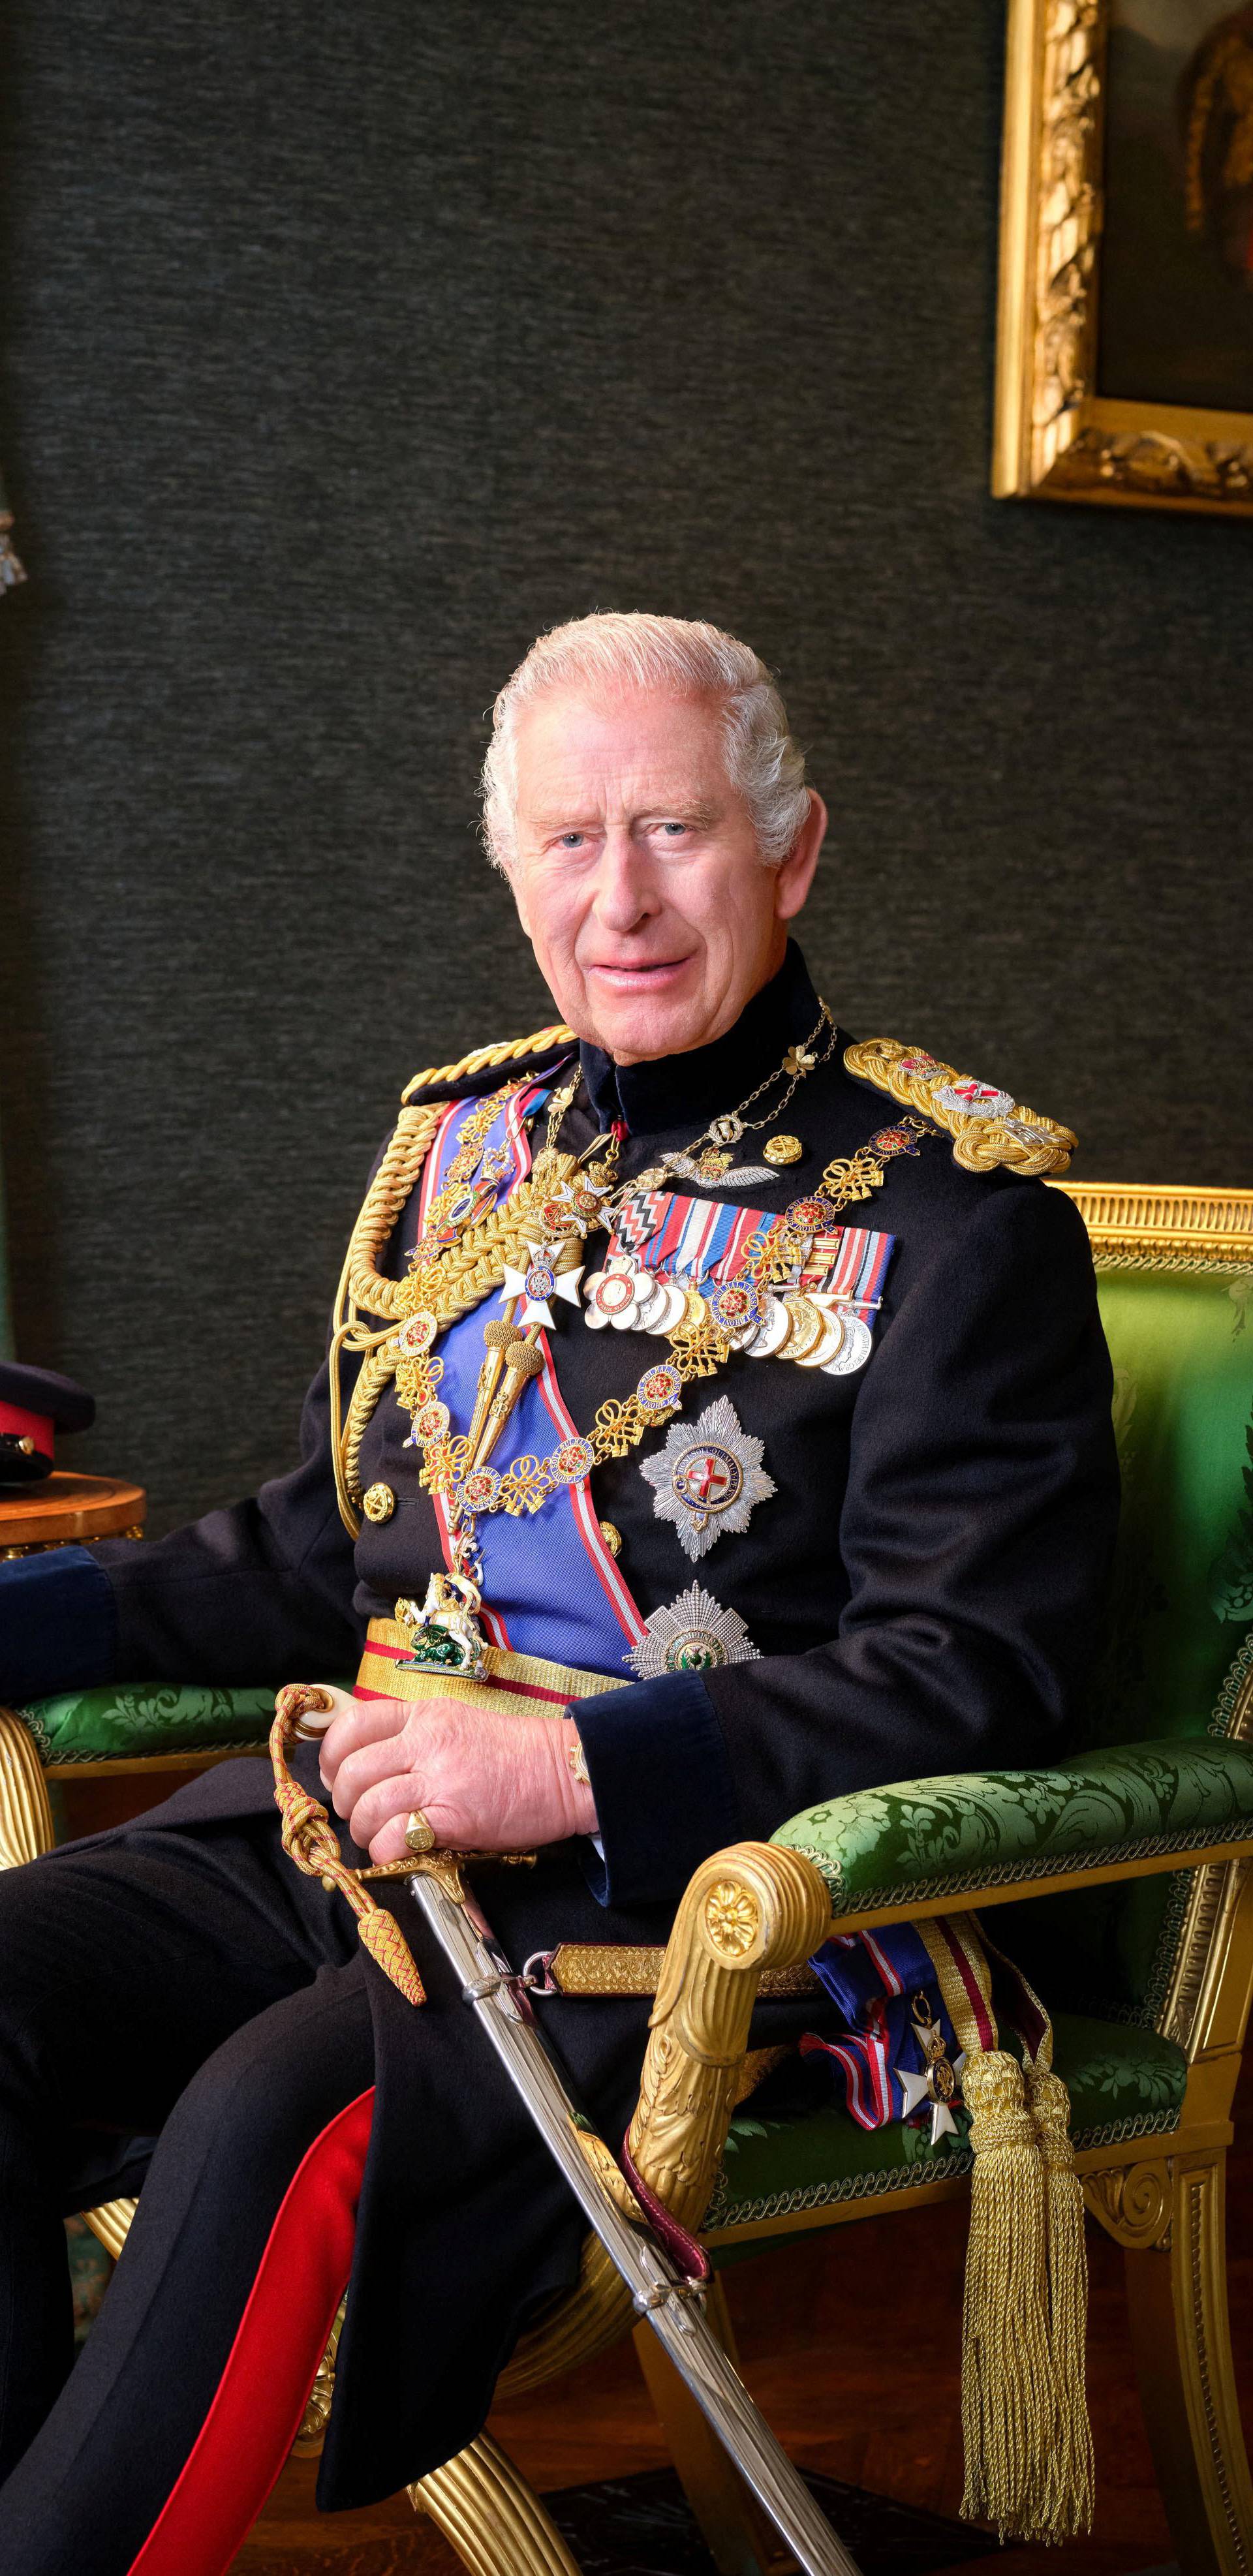 Britain's King Charles poses for a picture while wearing his Field Marshal No1 Full Ceremonial Frock Coat with medals, sword and decorations, in this undated handout picture